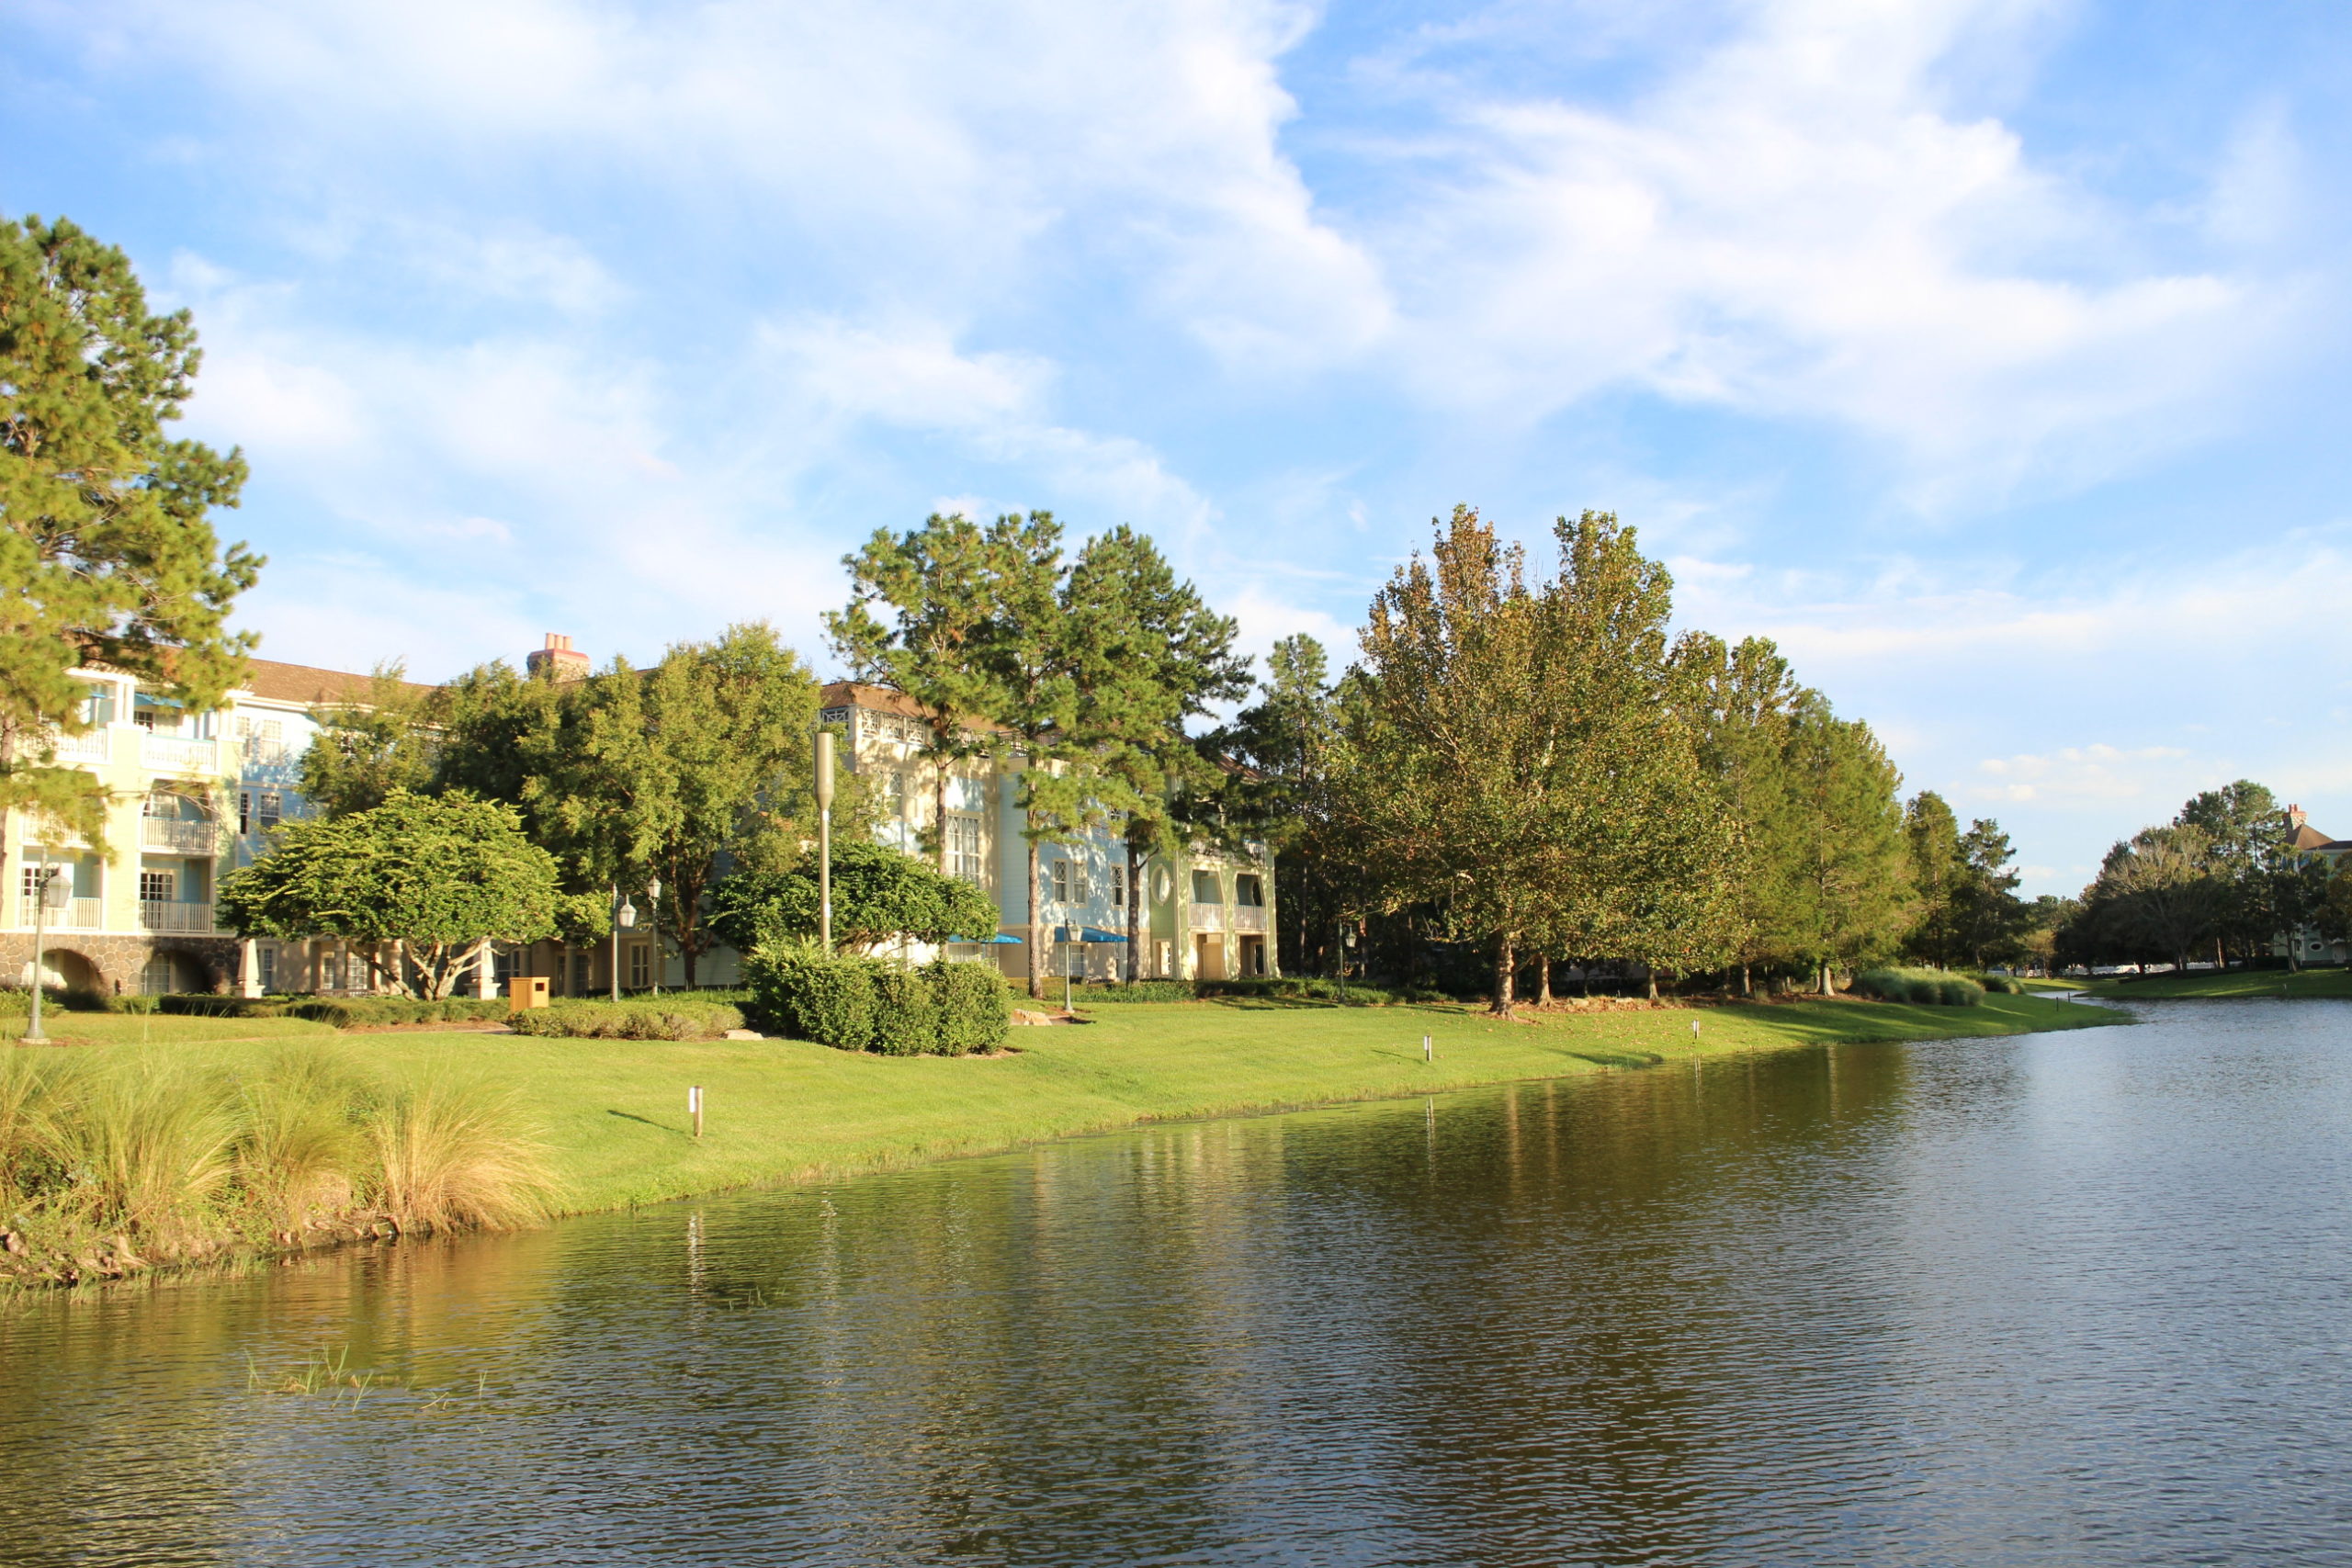 A reflective lake with Disney's Saratoga Springs Resort pastel buildings hidden behind trees